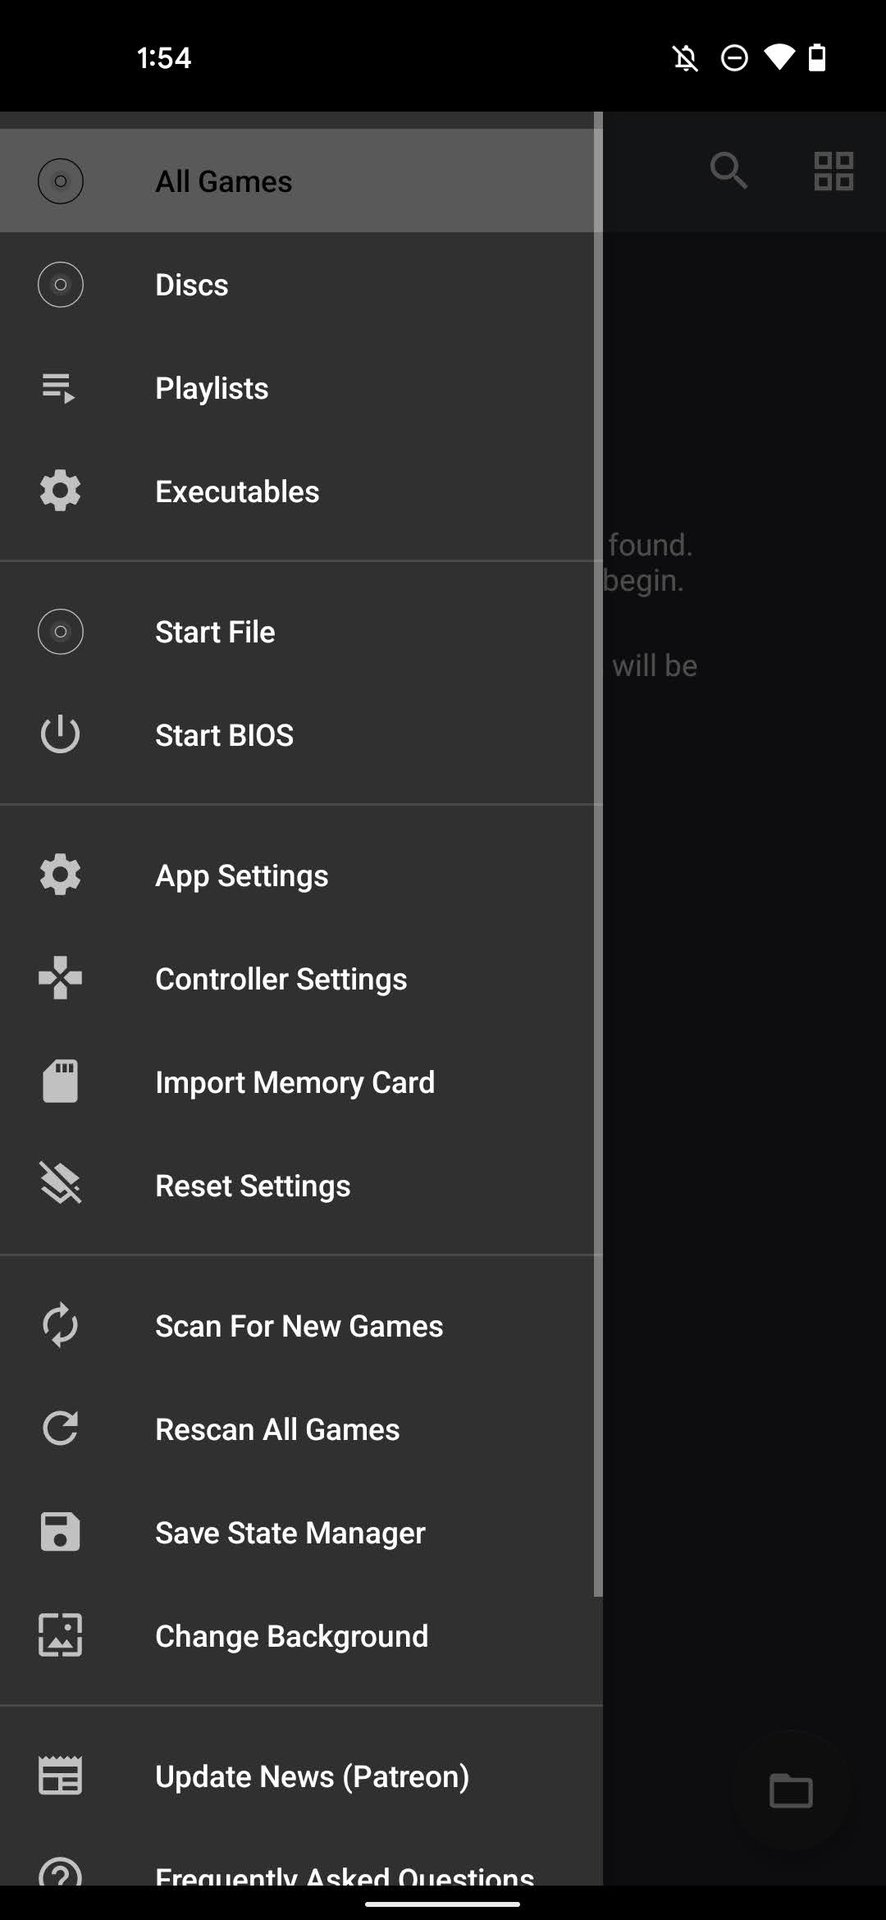 AetherSX2 App Settings for BIOS and Game List 2